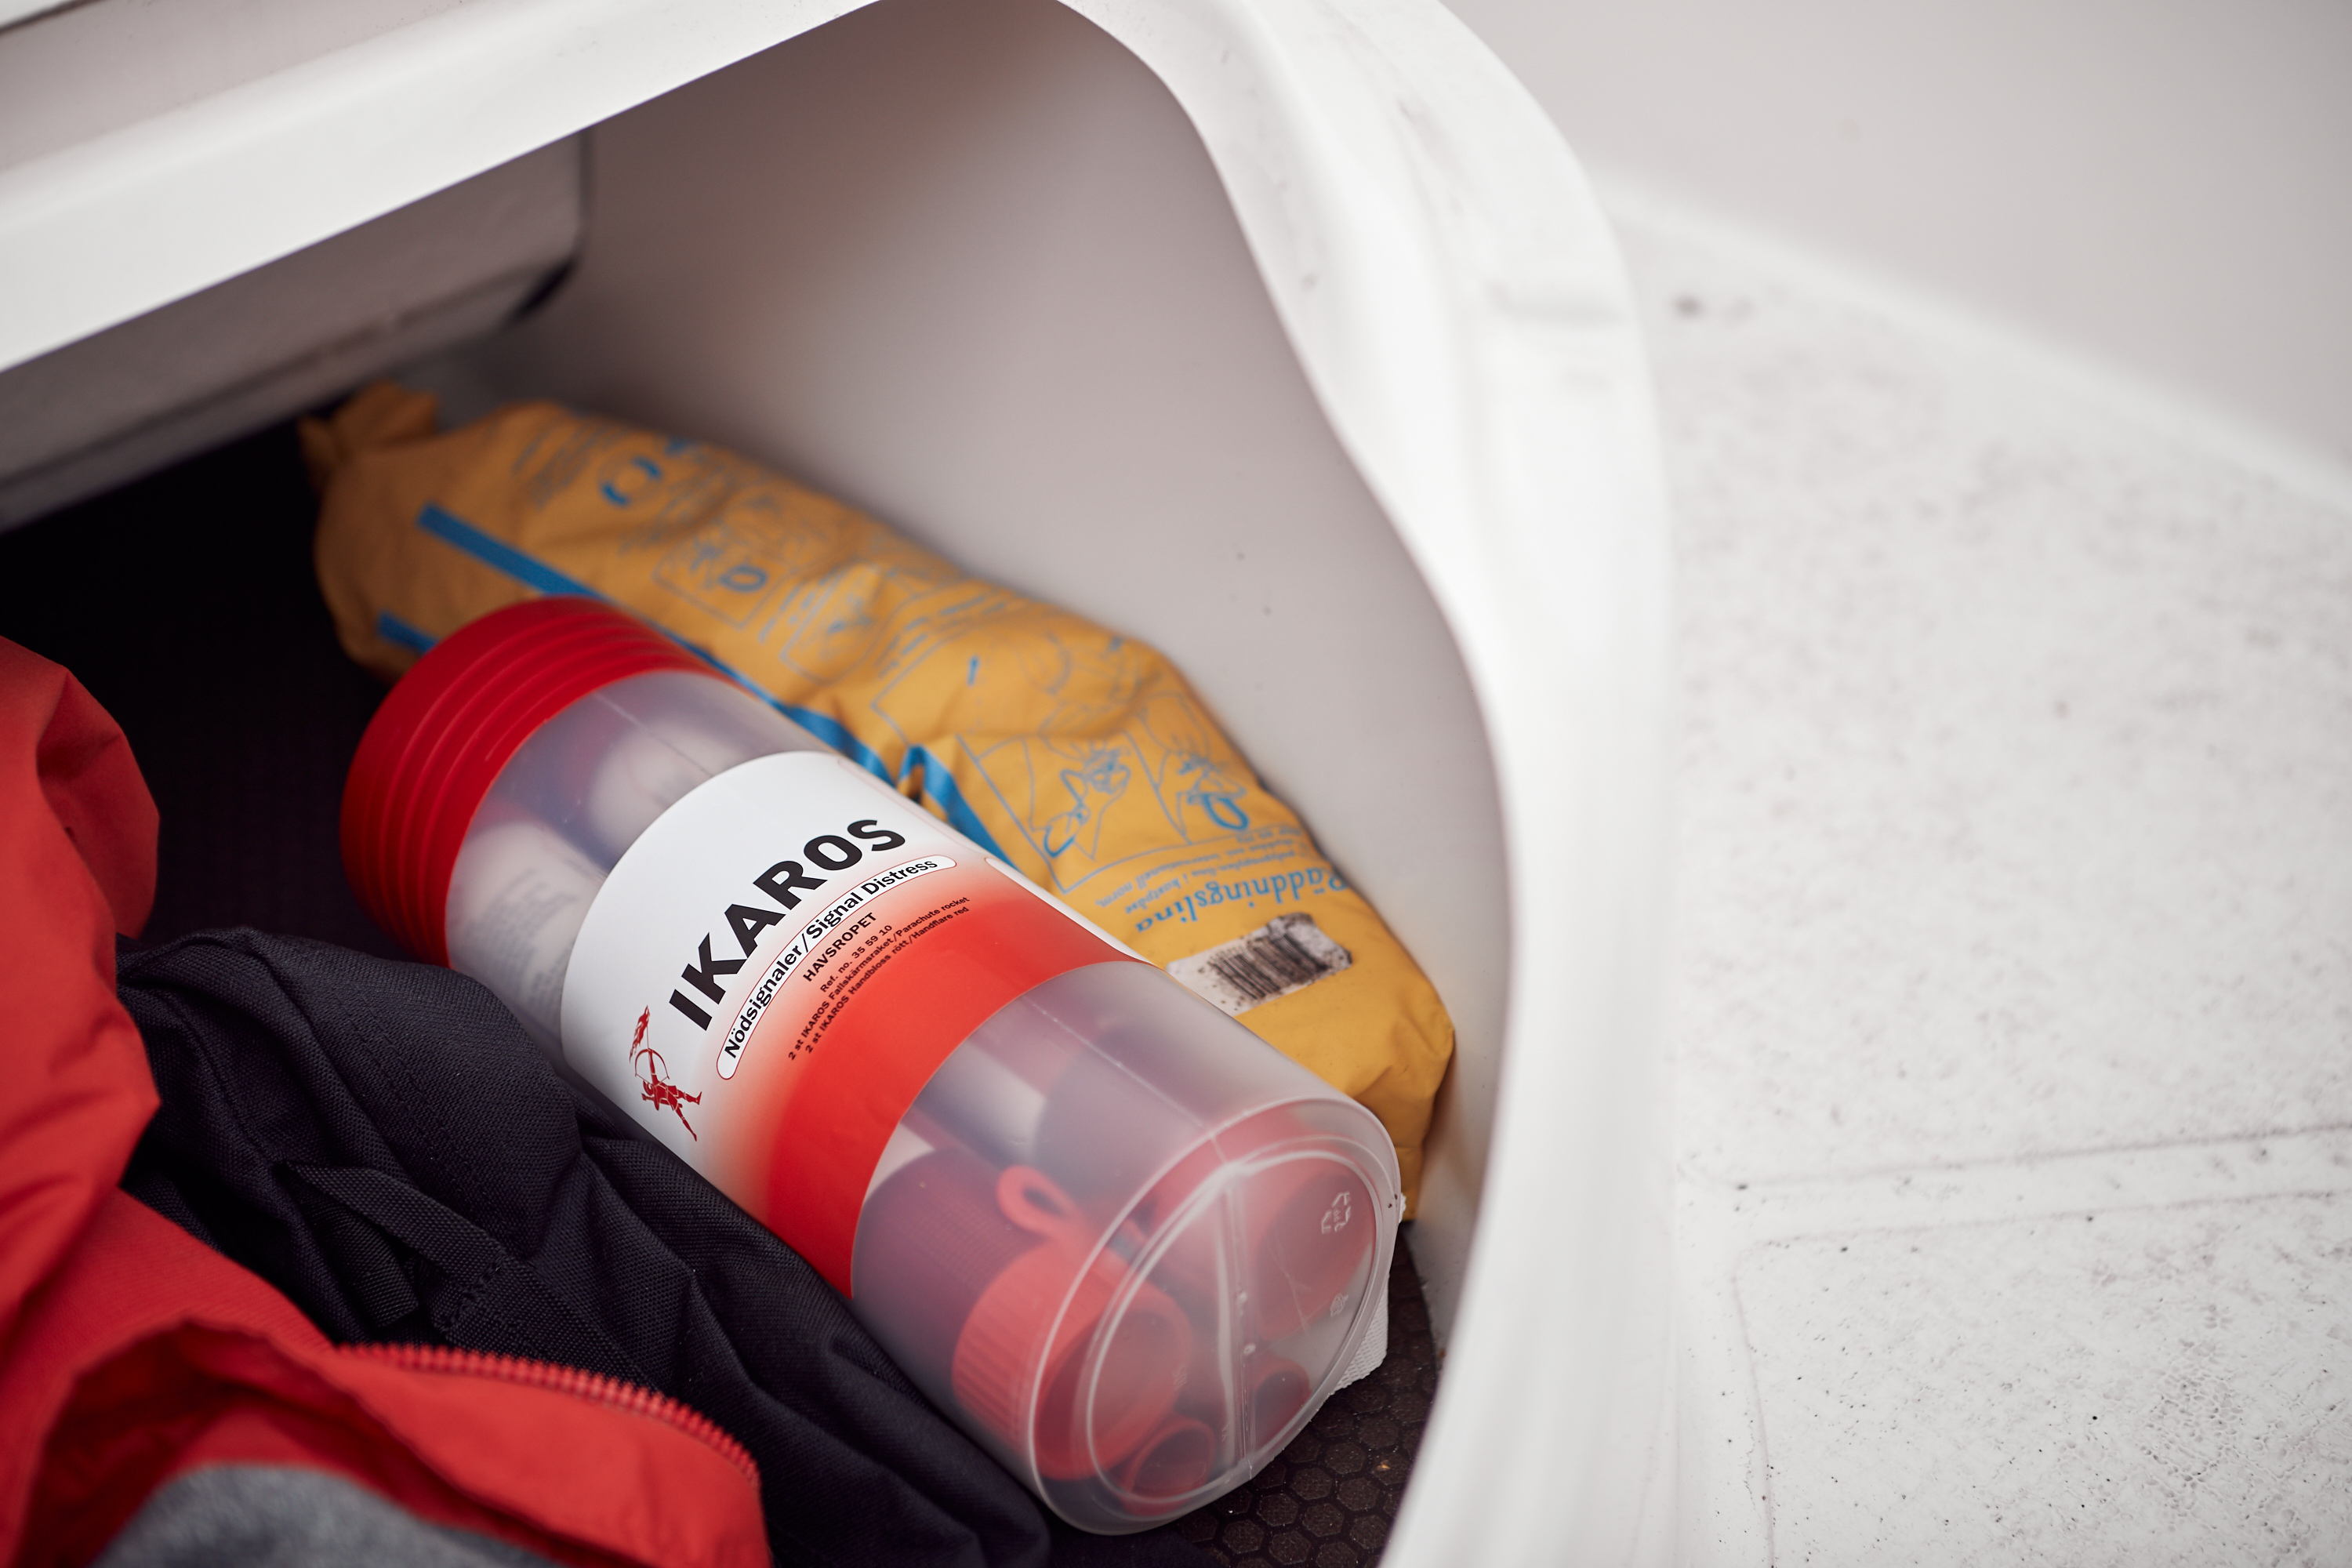 A close-up picture of an emergency kit containing distress flares placed in a small, white box together with a life jacket.